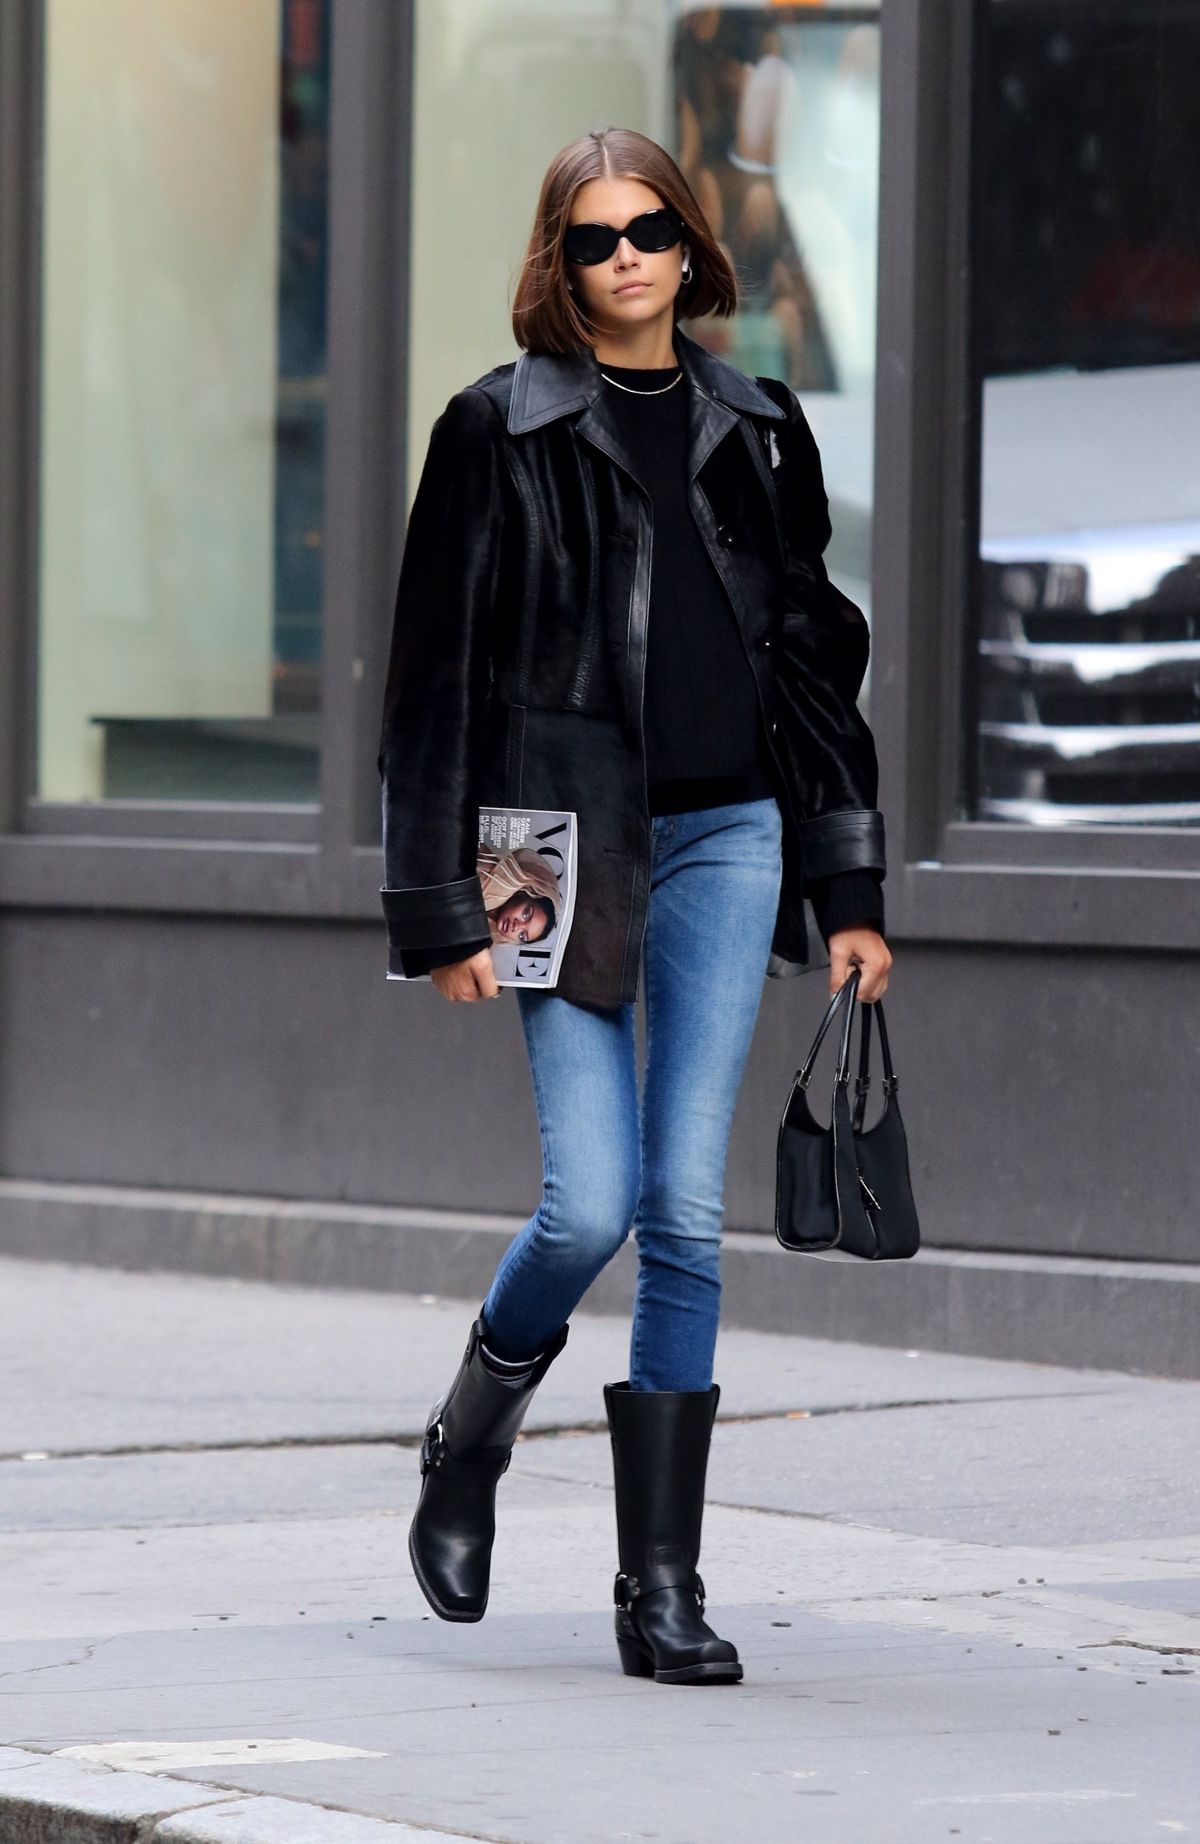 KAIA GERBER in Denim Out in New York 10/11/2019 – HawtCelebs